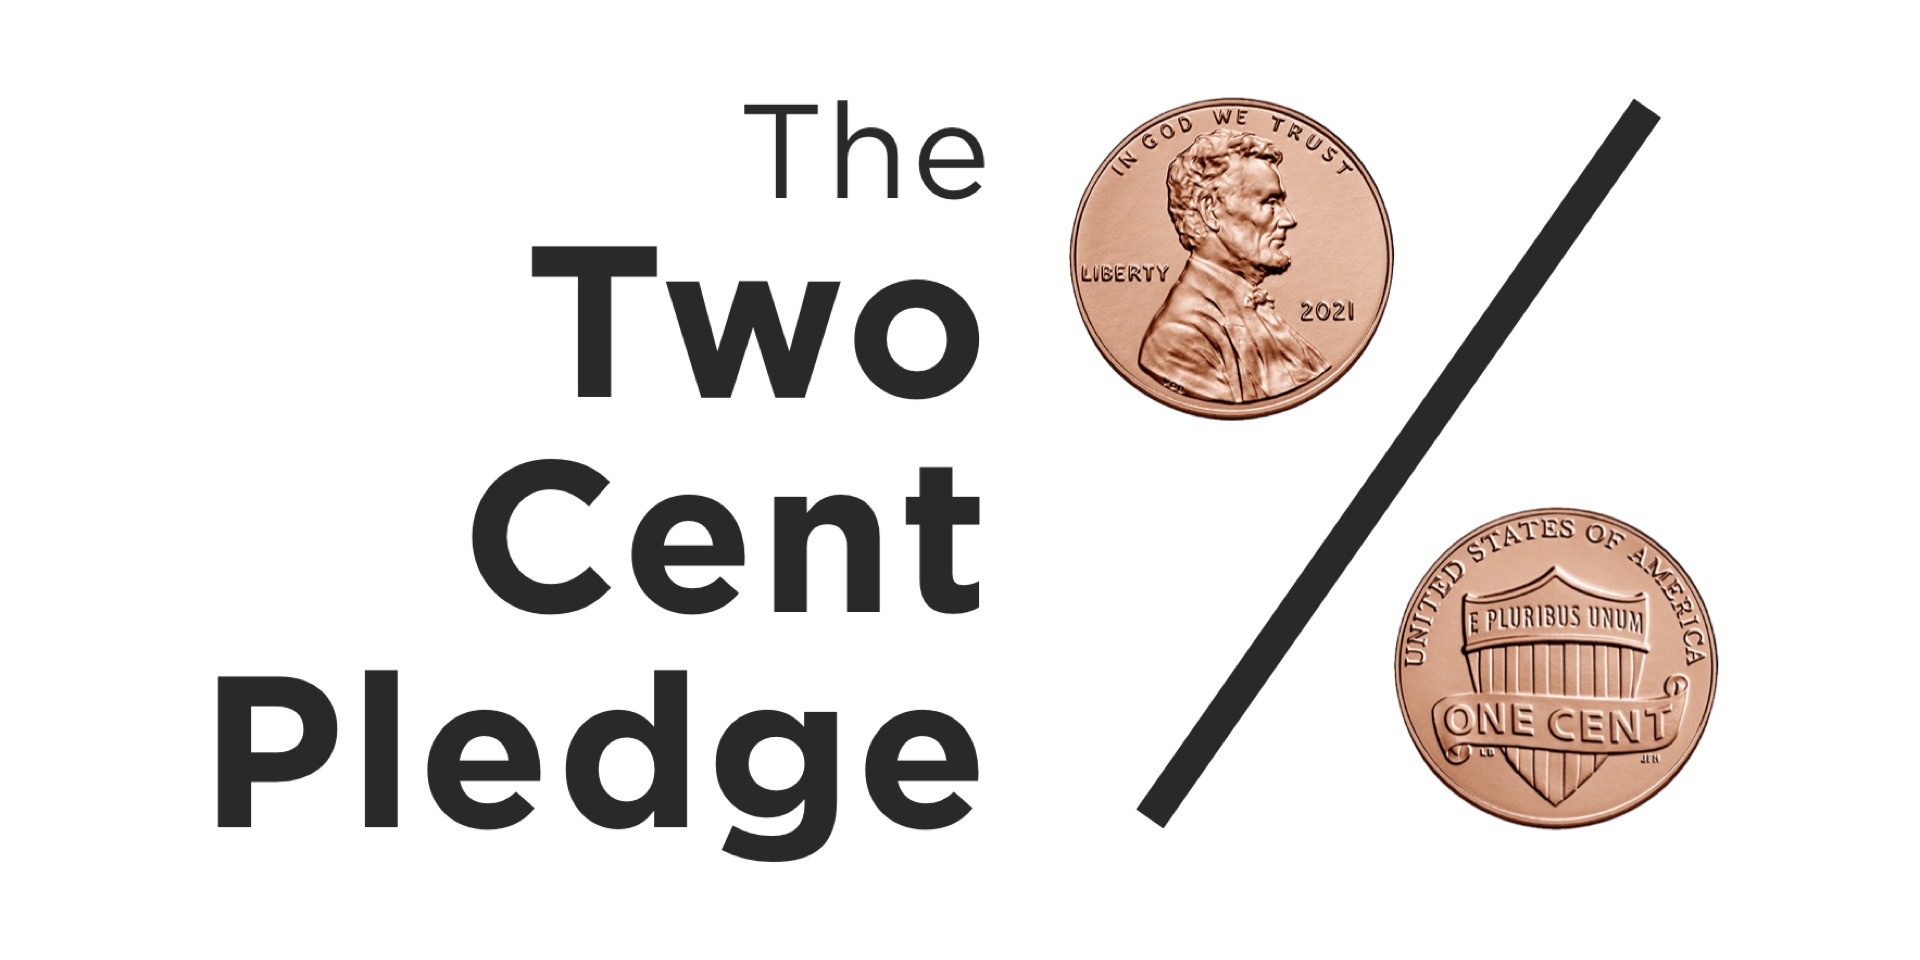 The Two Cent Pledge